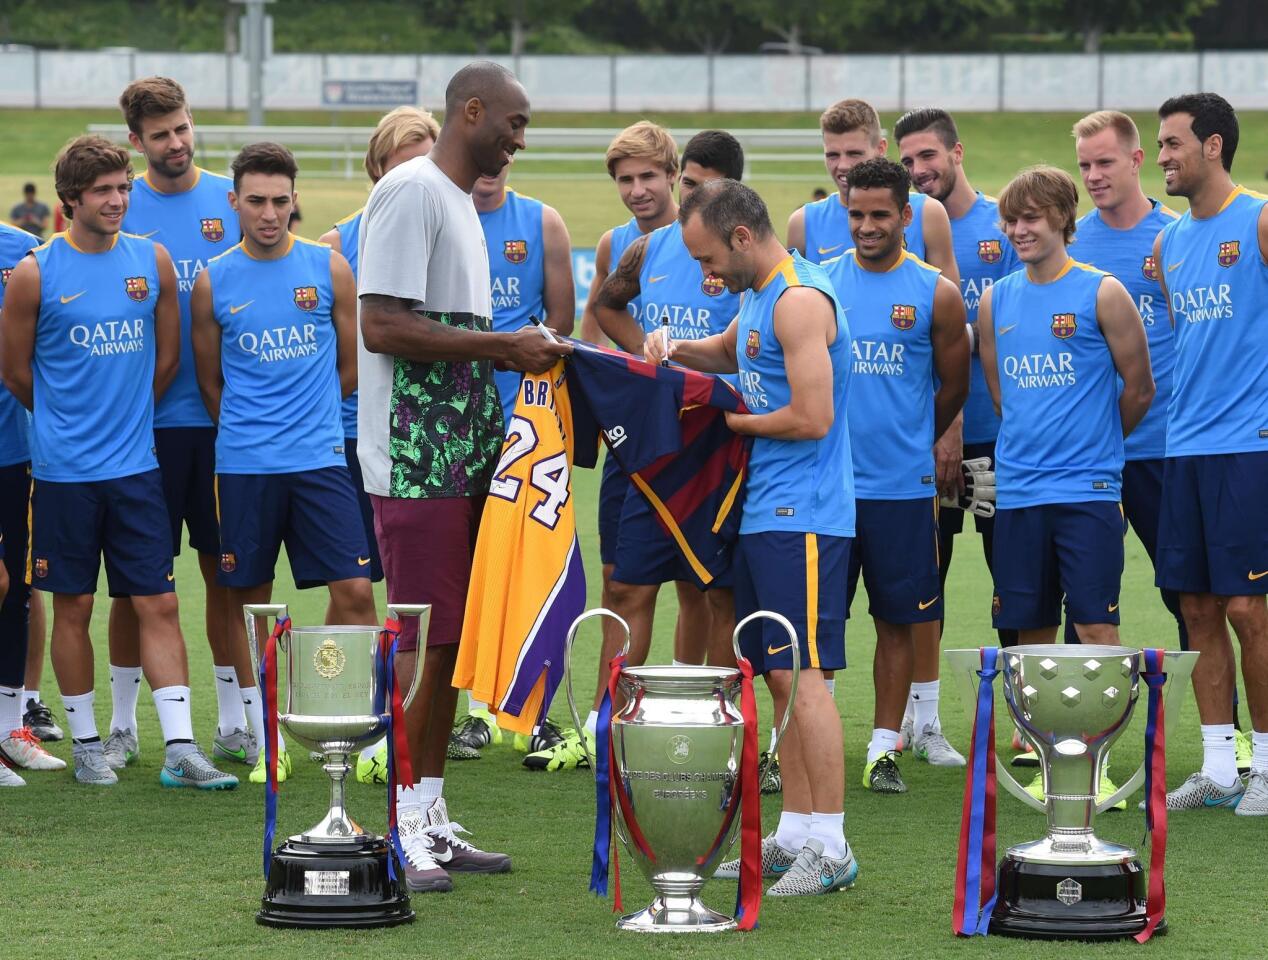 Los Angeles Lakers basketball star Kobe Bryant(C-L) watches as Barcelona team captain Andrés Iniesta Luján (C-R) signs a jersey watched by other members of the Barcelona football team before a training session at the StarHub Stadium in Carson on July 20, 2015. Barcelona will play the LA Galaxy in an International Champions Cup match on July 21. AFP PHOTO/MARK RALSTONMARK RALSTON/AFP/Getty Images ** OUTS - ELSENT, FPG - OUTS * NM, PH, VA if sourced by CT, LA or MoD **